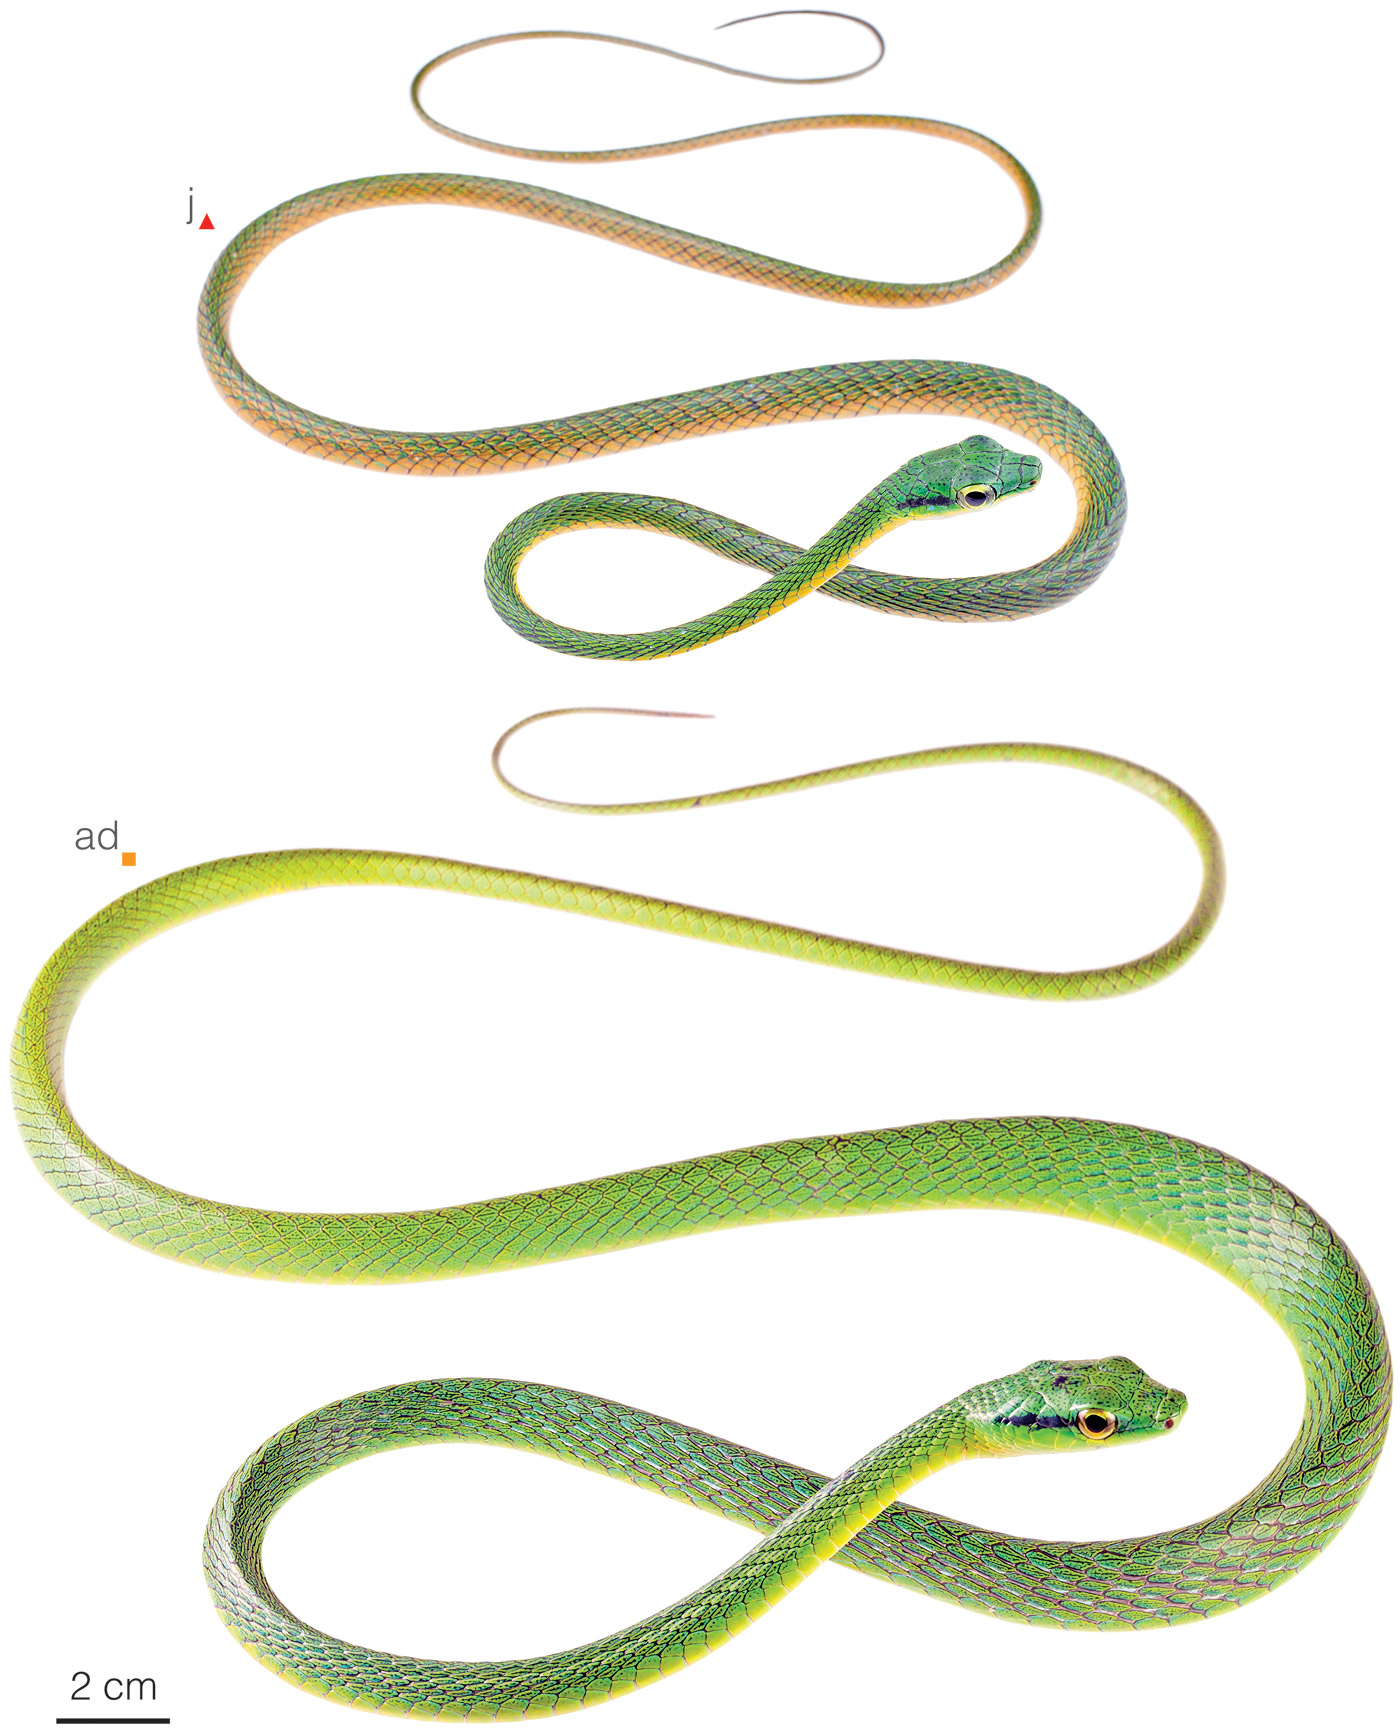 Figure showing variation among individuals of Leptophis bocourti